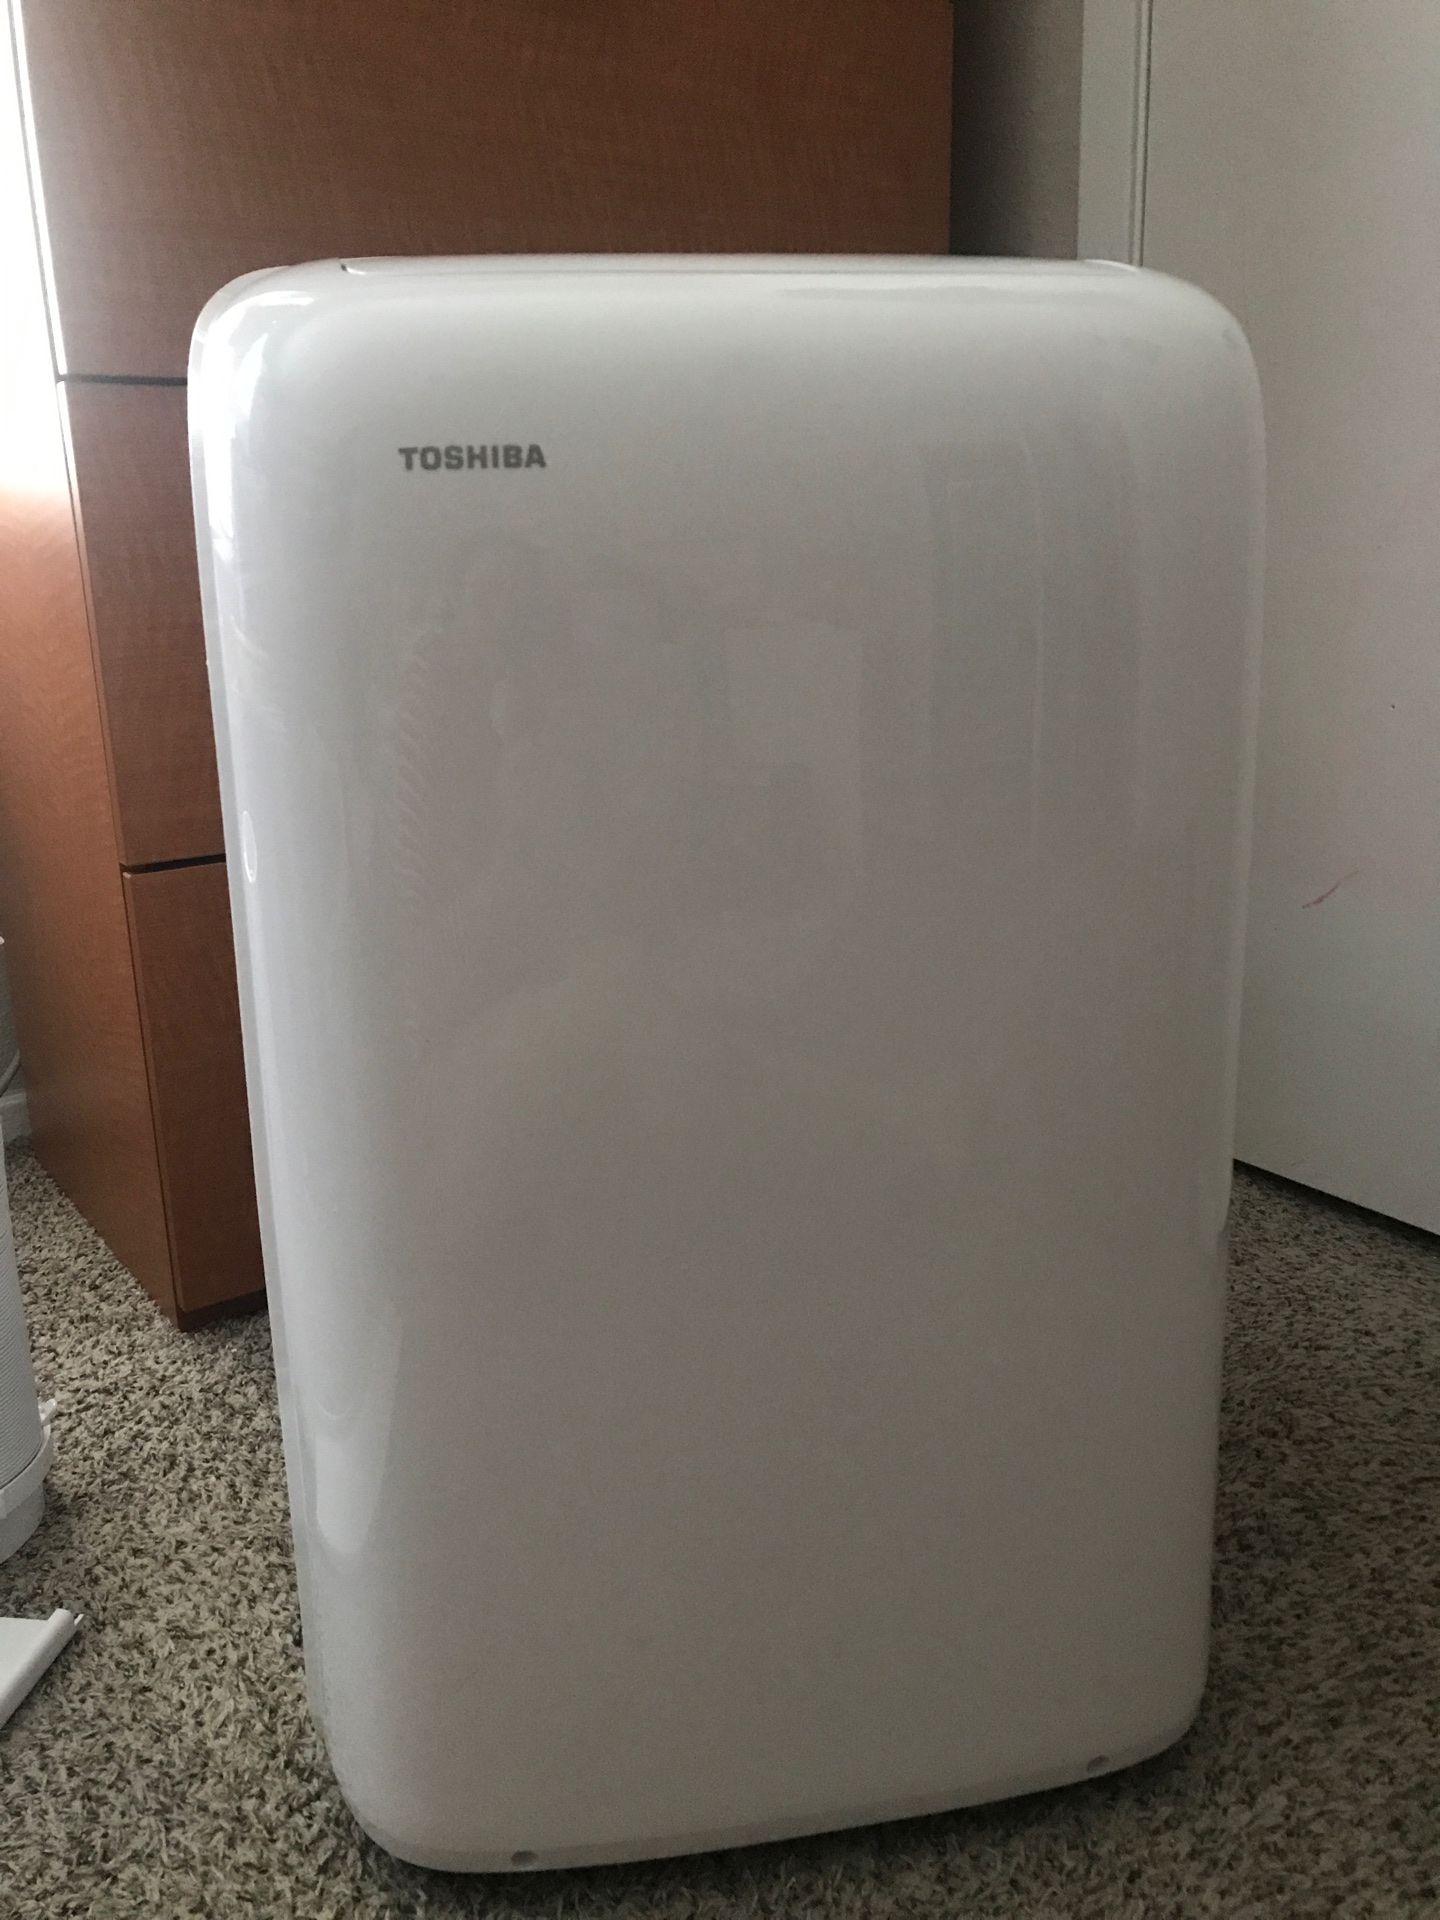 Toshiba Mobile Type Air Conditioner